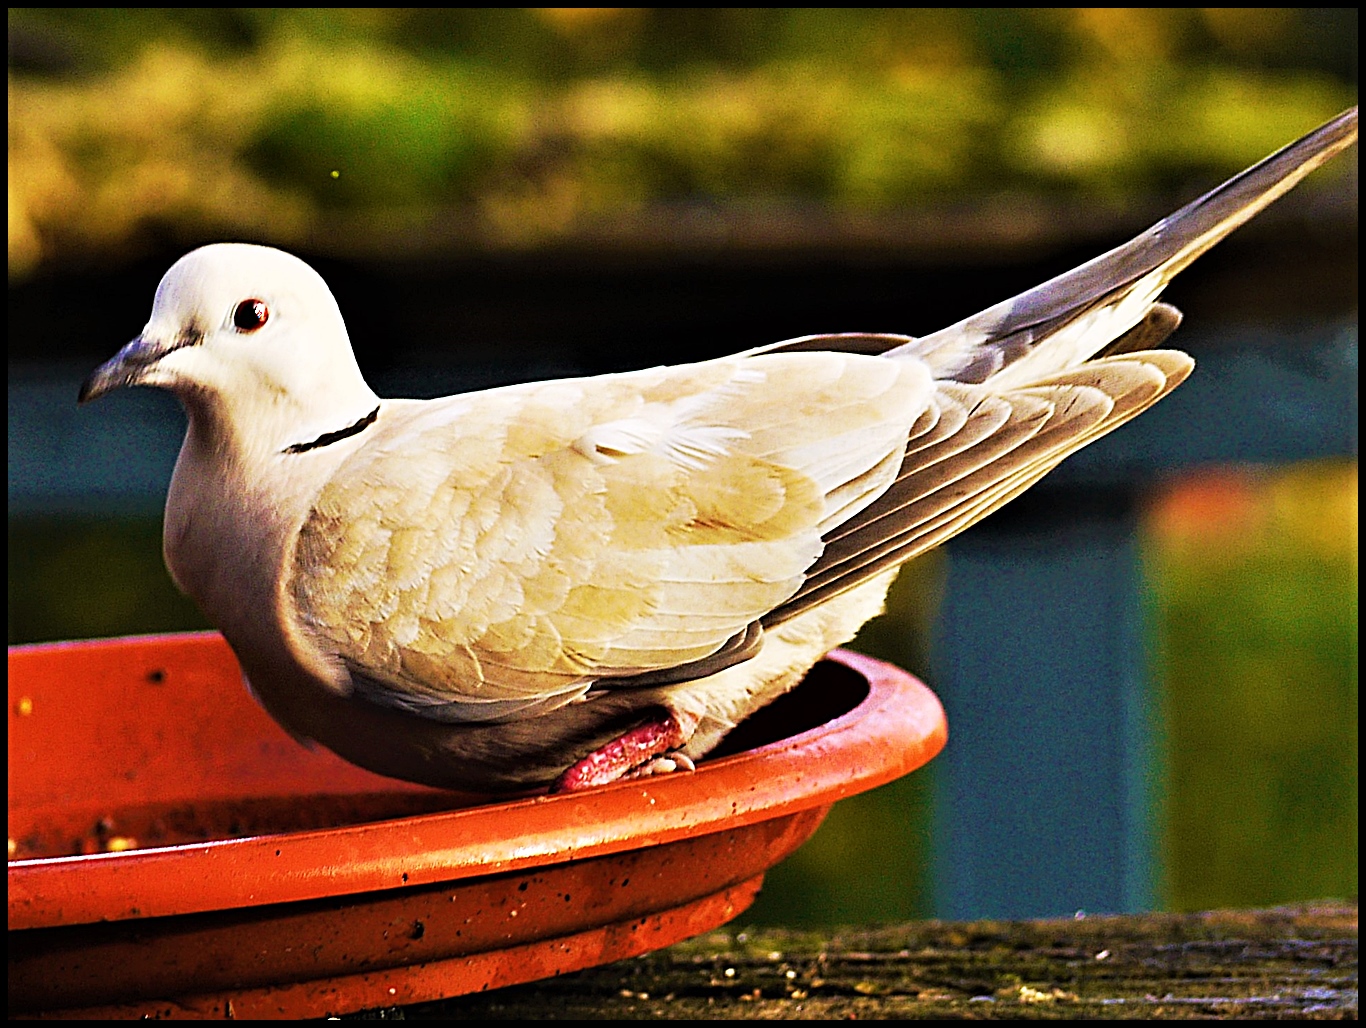 Another Collared Dove...